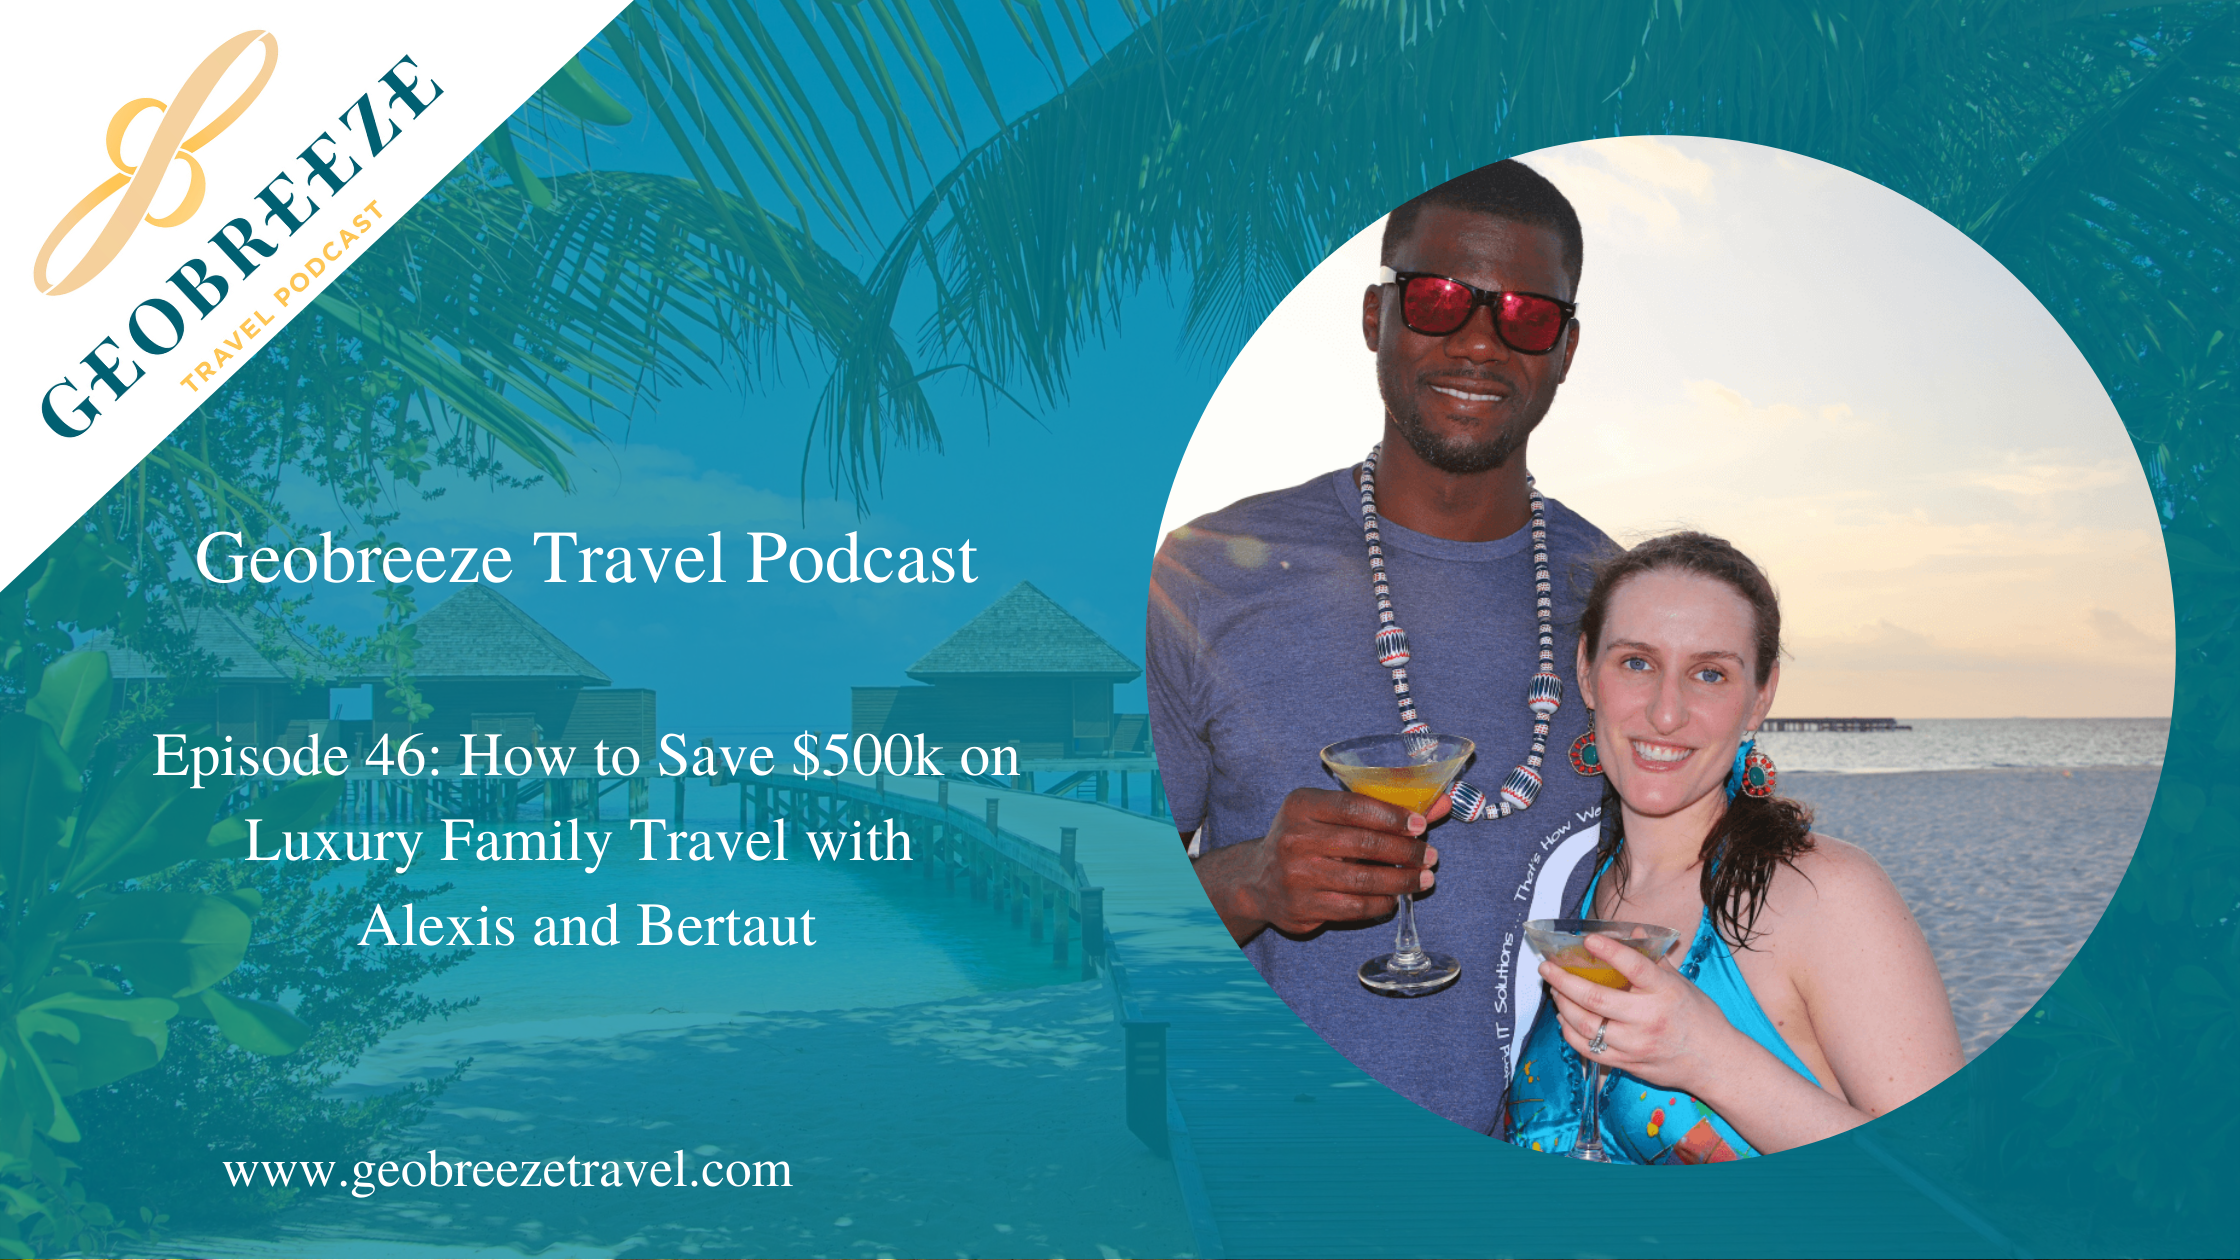 Episode 46: How to Save $500K on Luxury Family Travel with Alexis and Bertaut